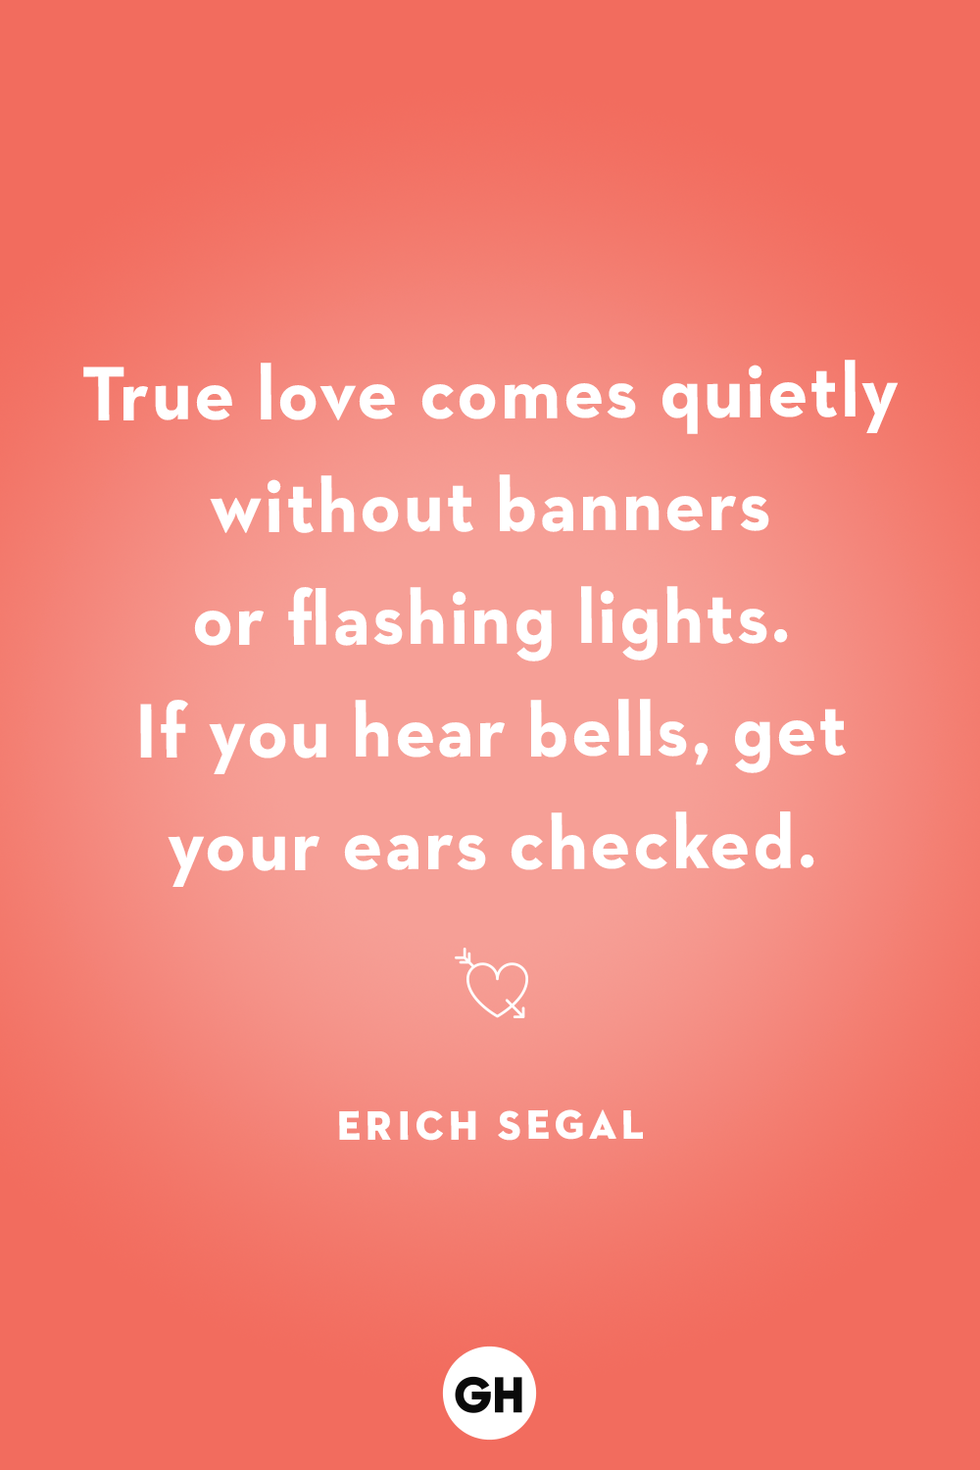 true love comes quietly without banners or flashing lights if you hear bells get your ears checked erich segal